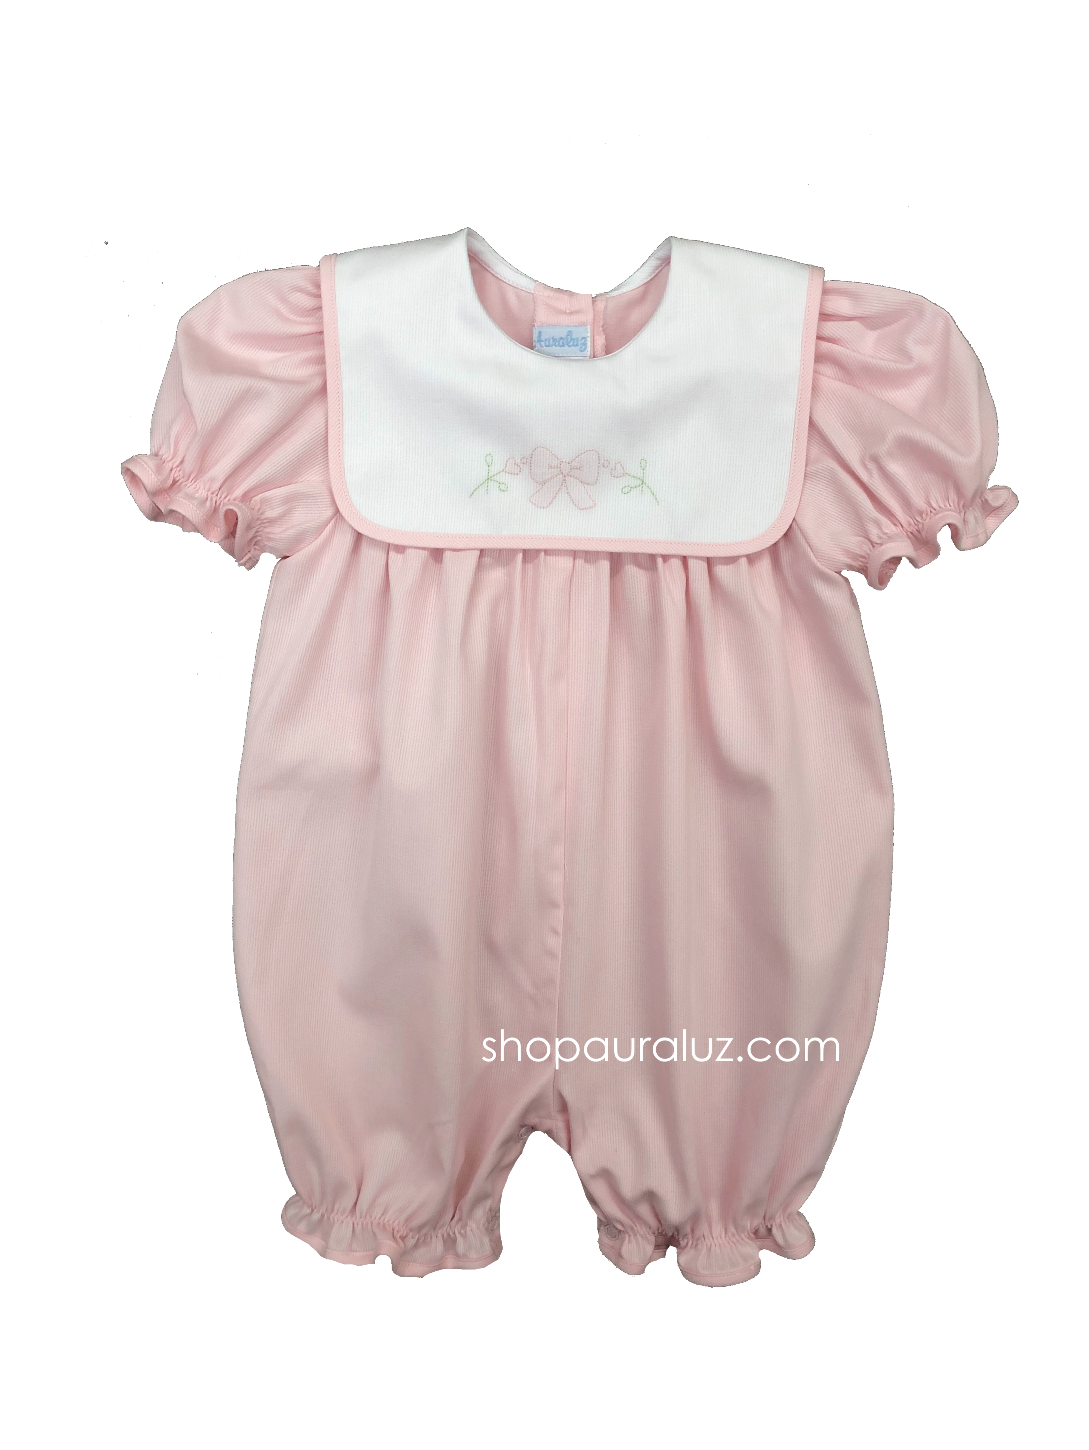 Auraluz Pique Shortall..Pink with white square collar and embroidered bow